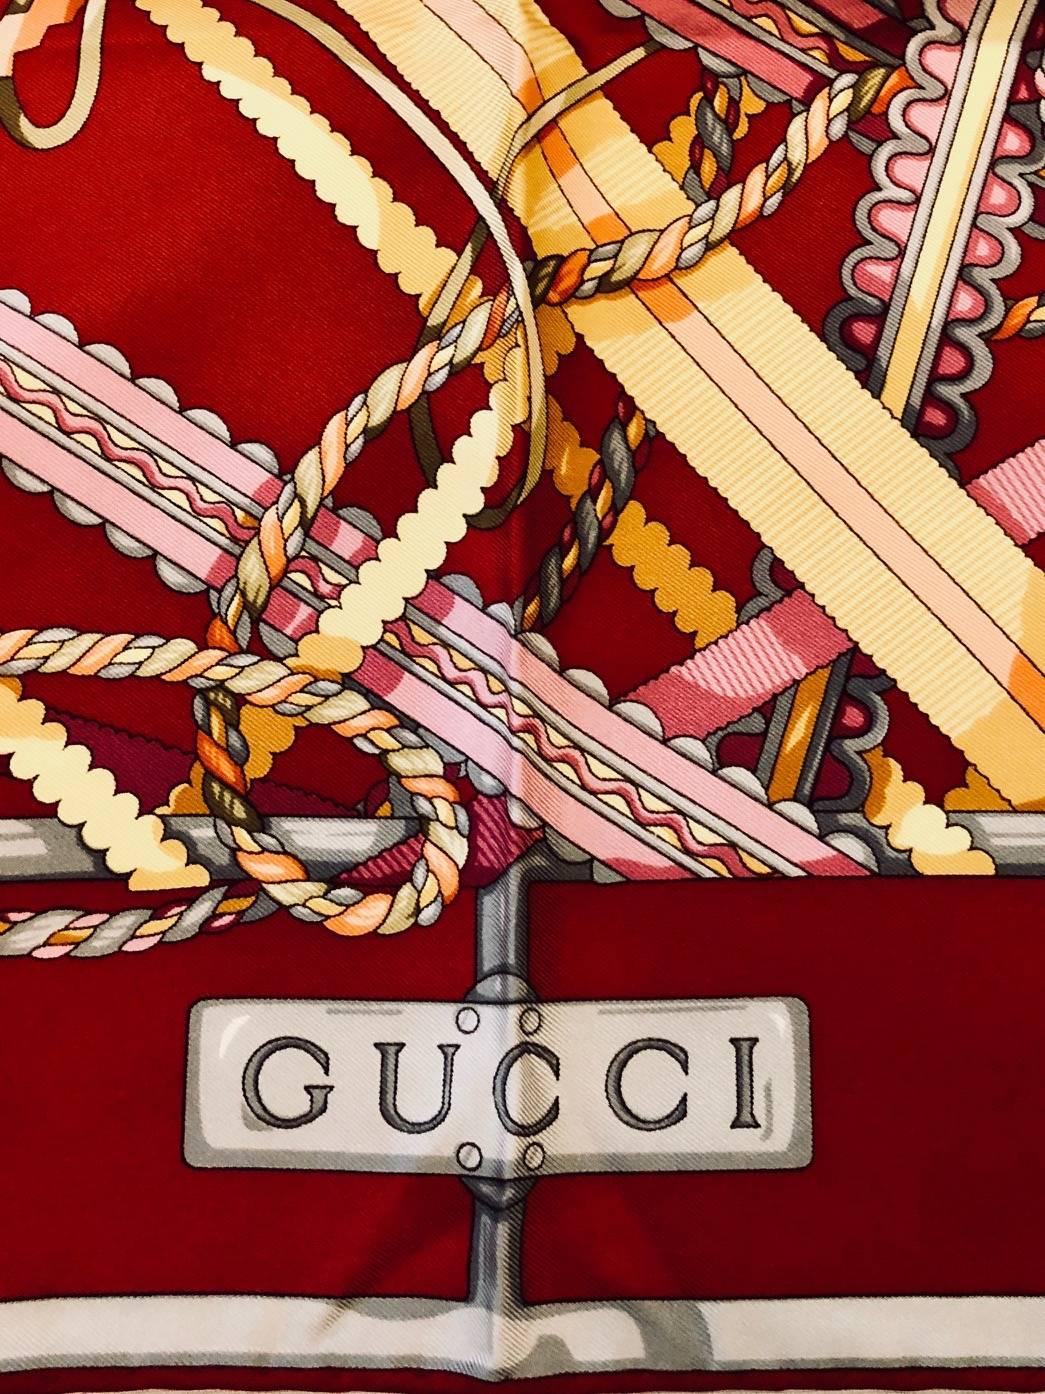 Gucci Garnet scarf celebrates the ornamental trim that takes minimal designs to maximum impact!  Features ultra-luxurious silk twill fabric printed with a multitude of ribbons, tassels, and ropes in a variety of colors allover.  Finished with hand